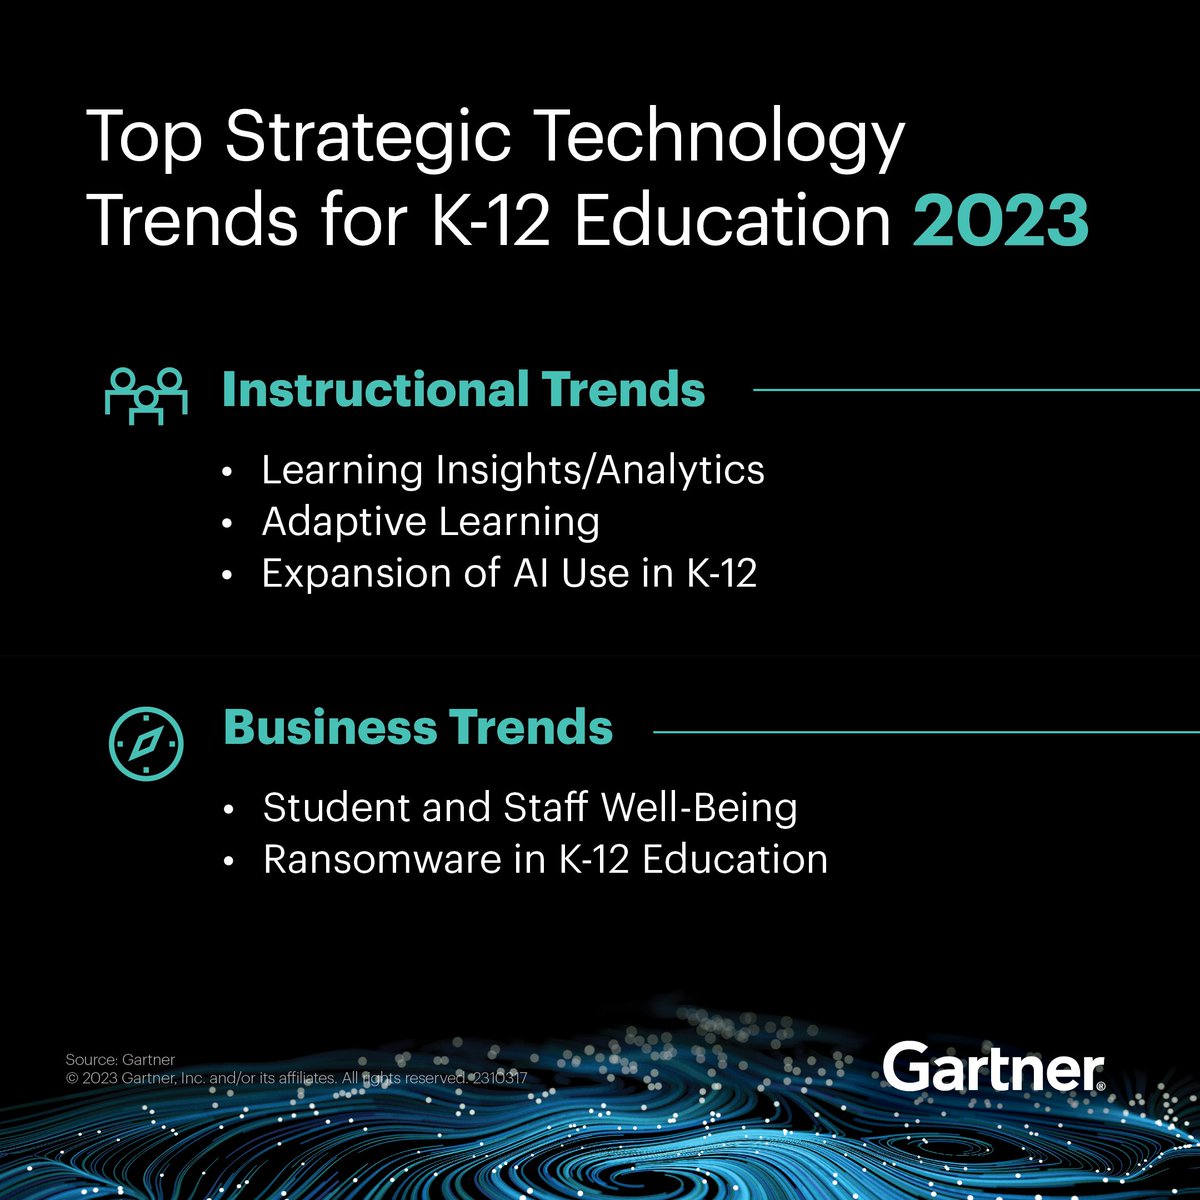 #IN Four crises have escalated primary and secondary educational business and #technology trends to priority status. 

Education CIOs: Focus on these #TechTrends to adapt and optimize: gtnr.it/3MOM8pM #GartnerIT